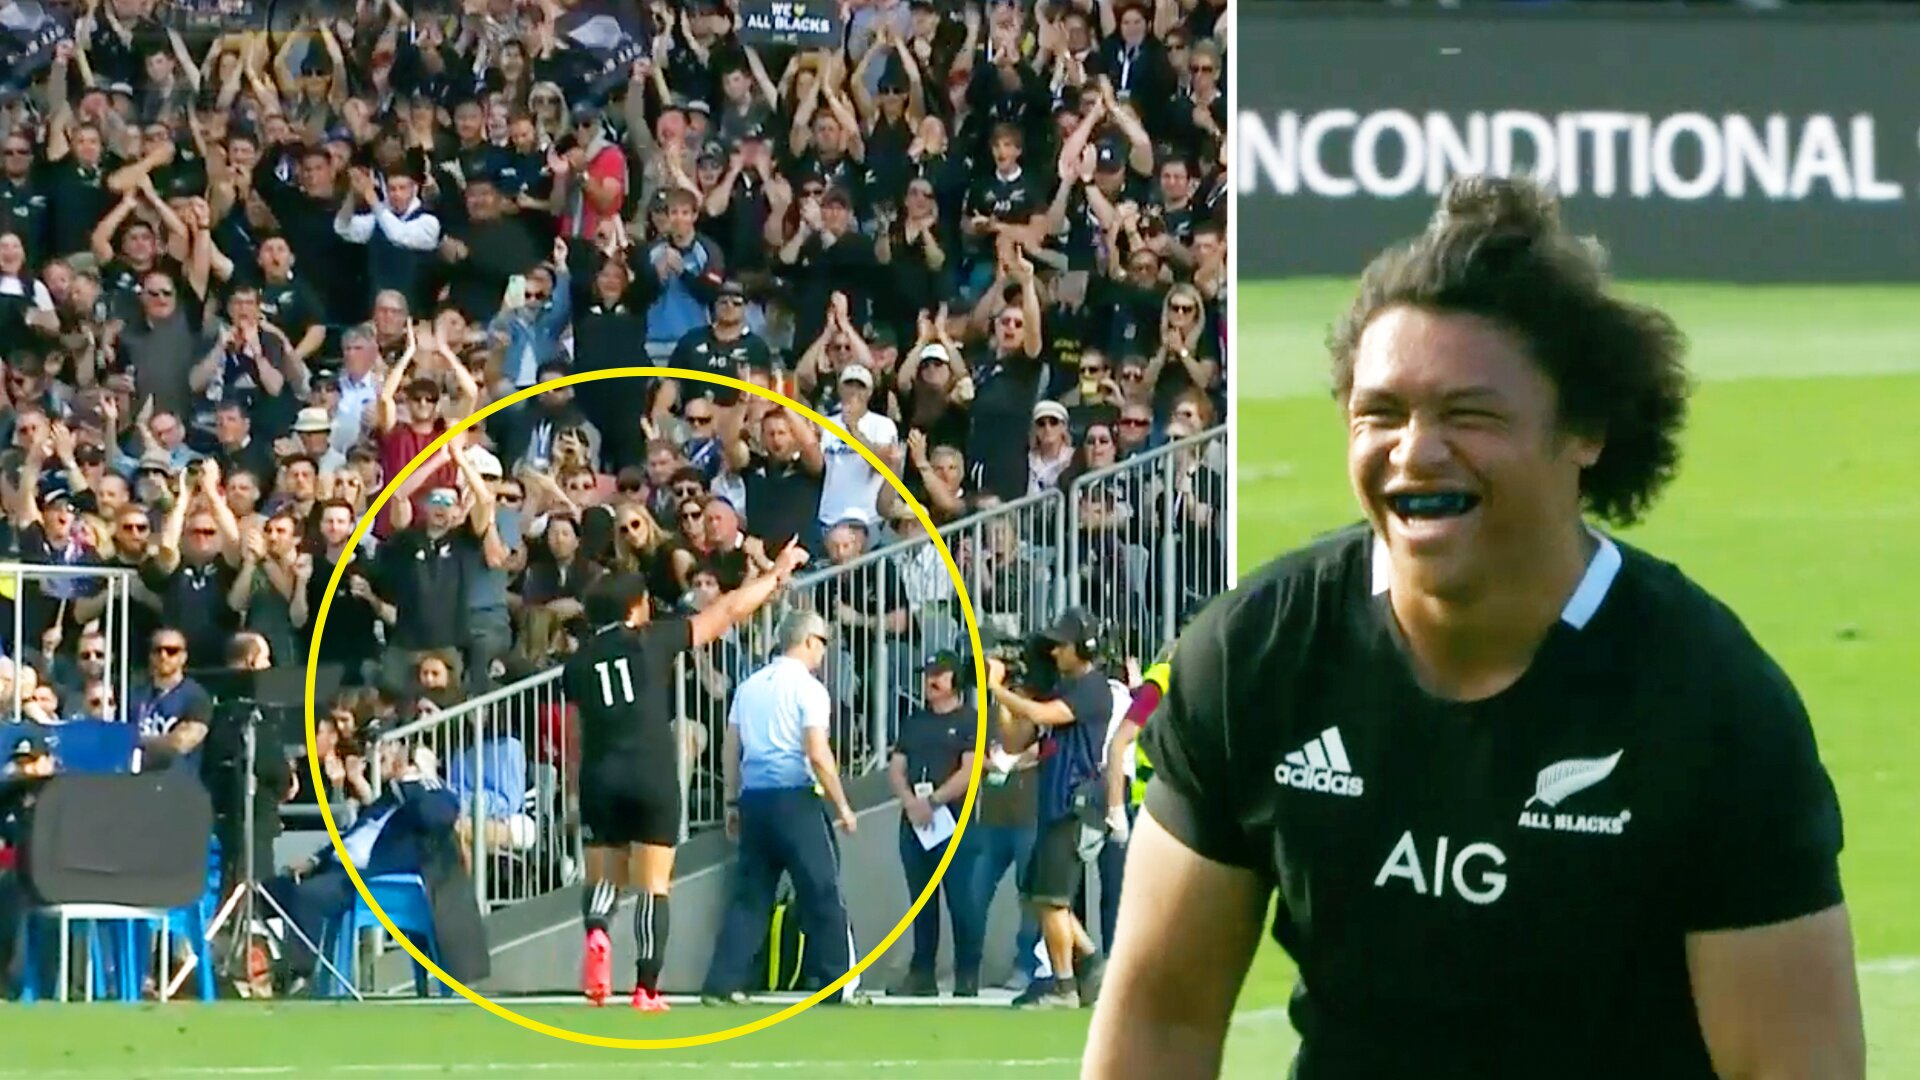 WATCH: The powerful moment that Caleb Clarke realises he's getting a standing ovation at Eden Park